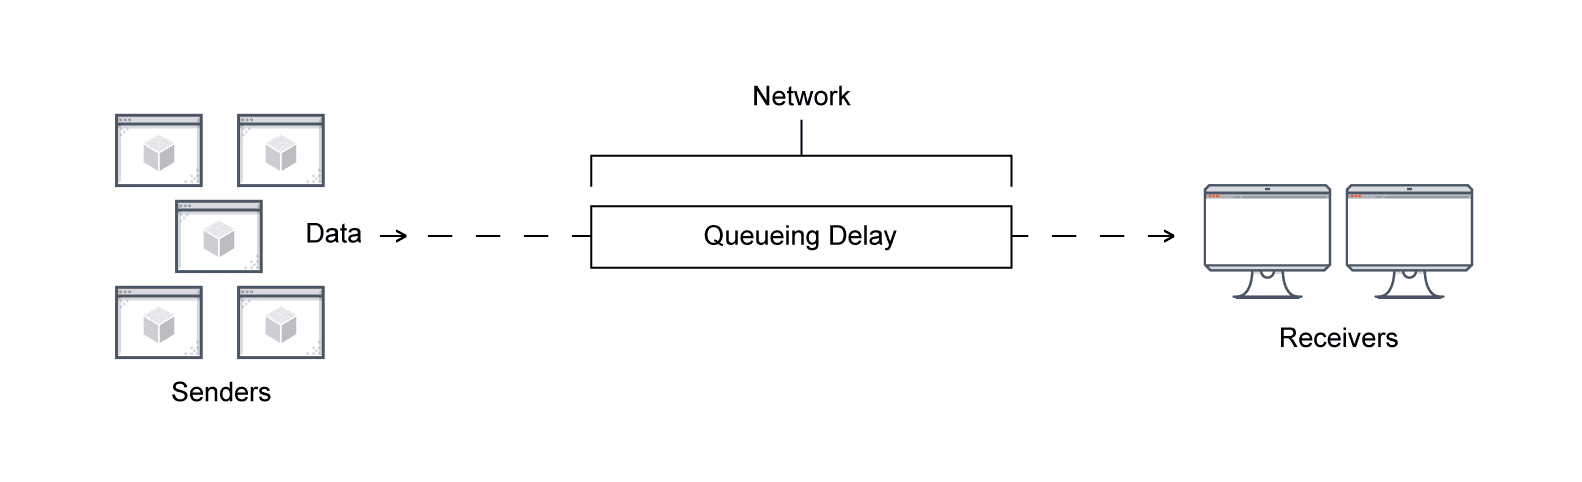 This image depicts network congestion showing: data traveling through network and becoming congetsted on it's way to receivers.